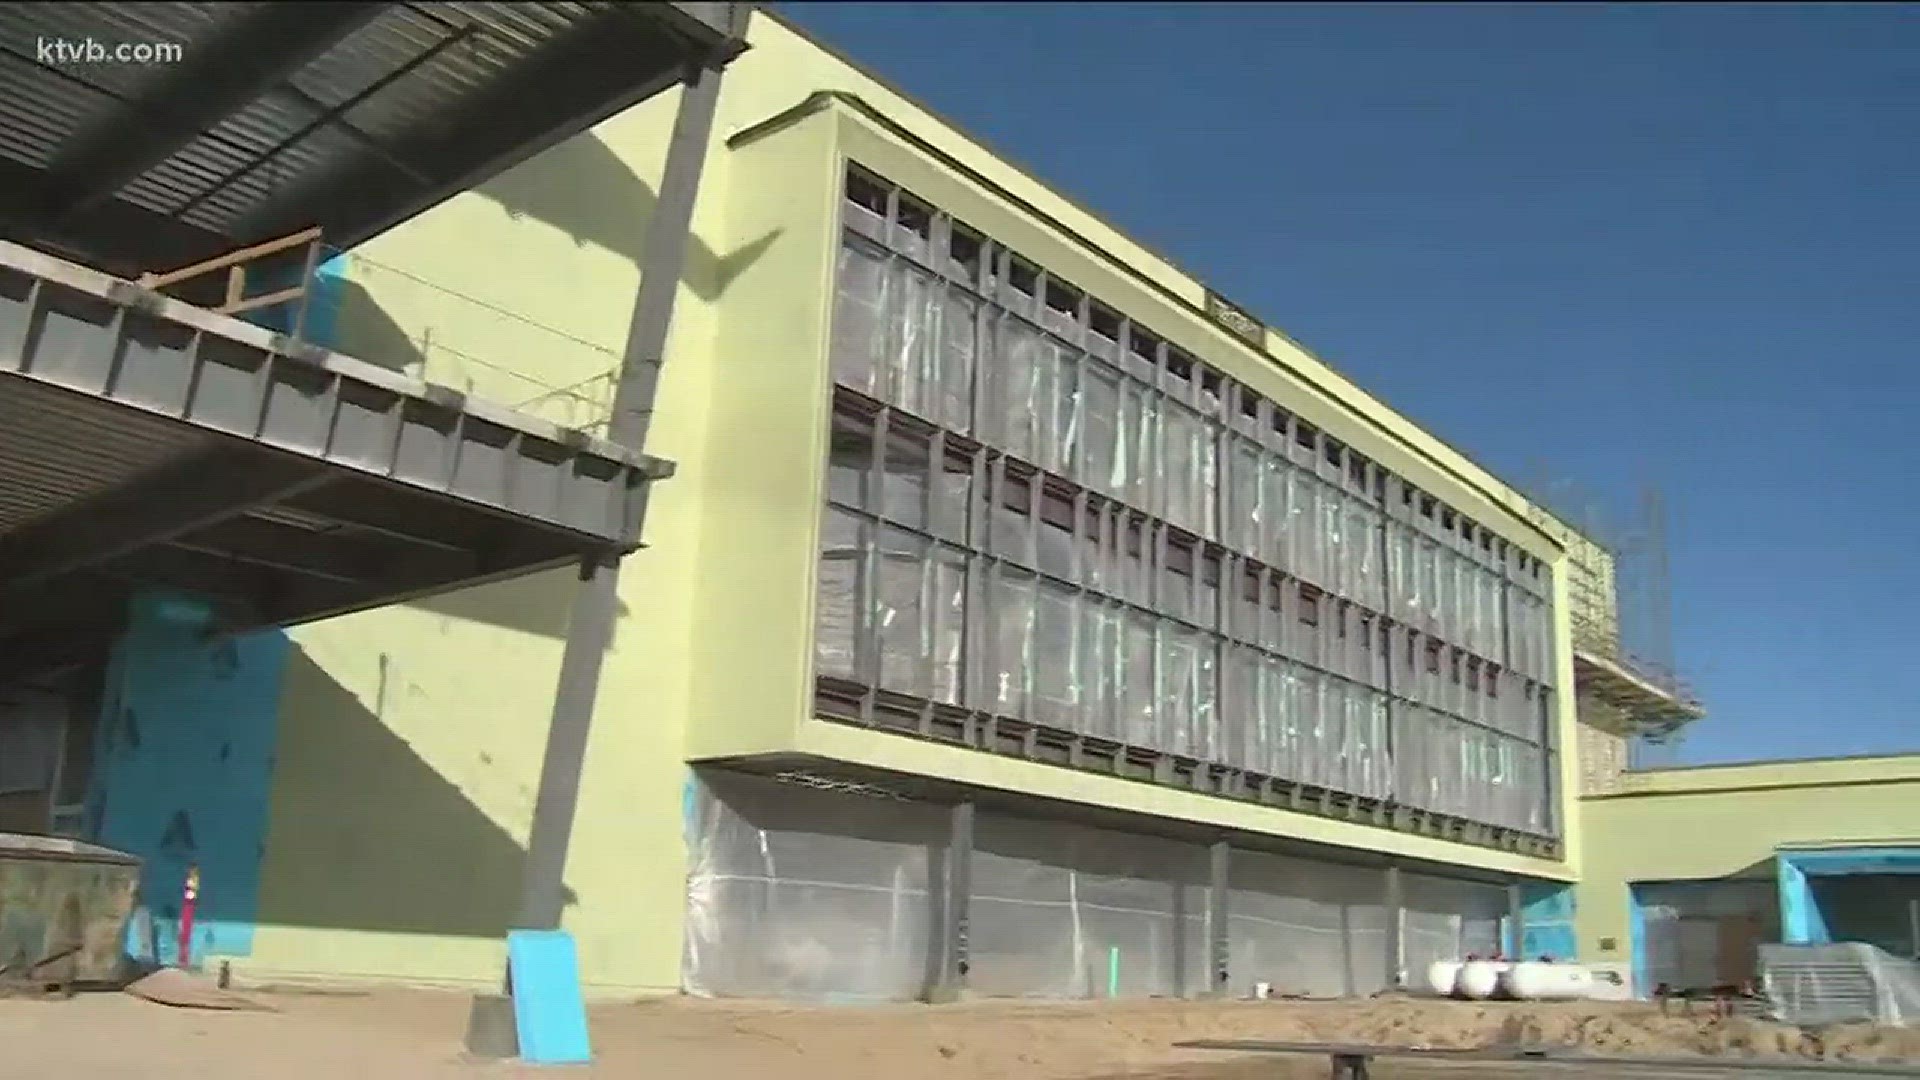 Progress being made on Idaho's first medical school.